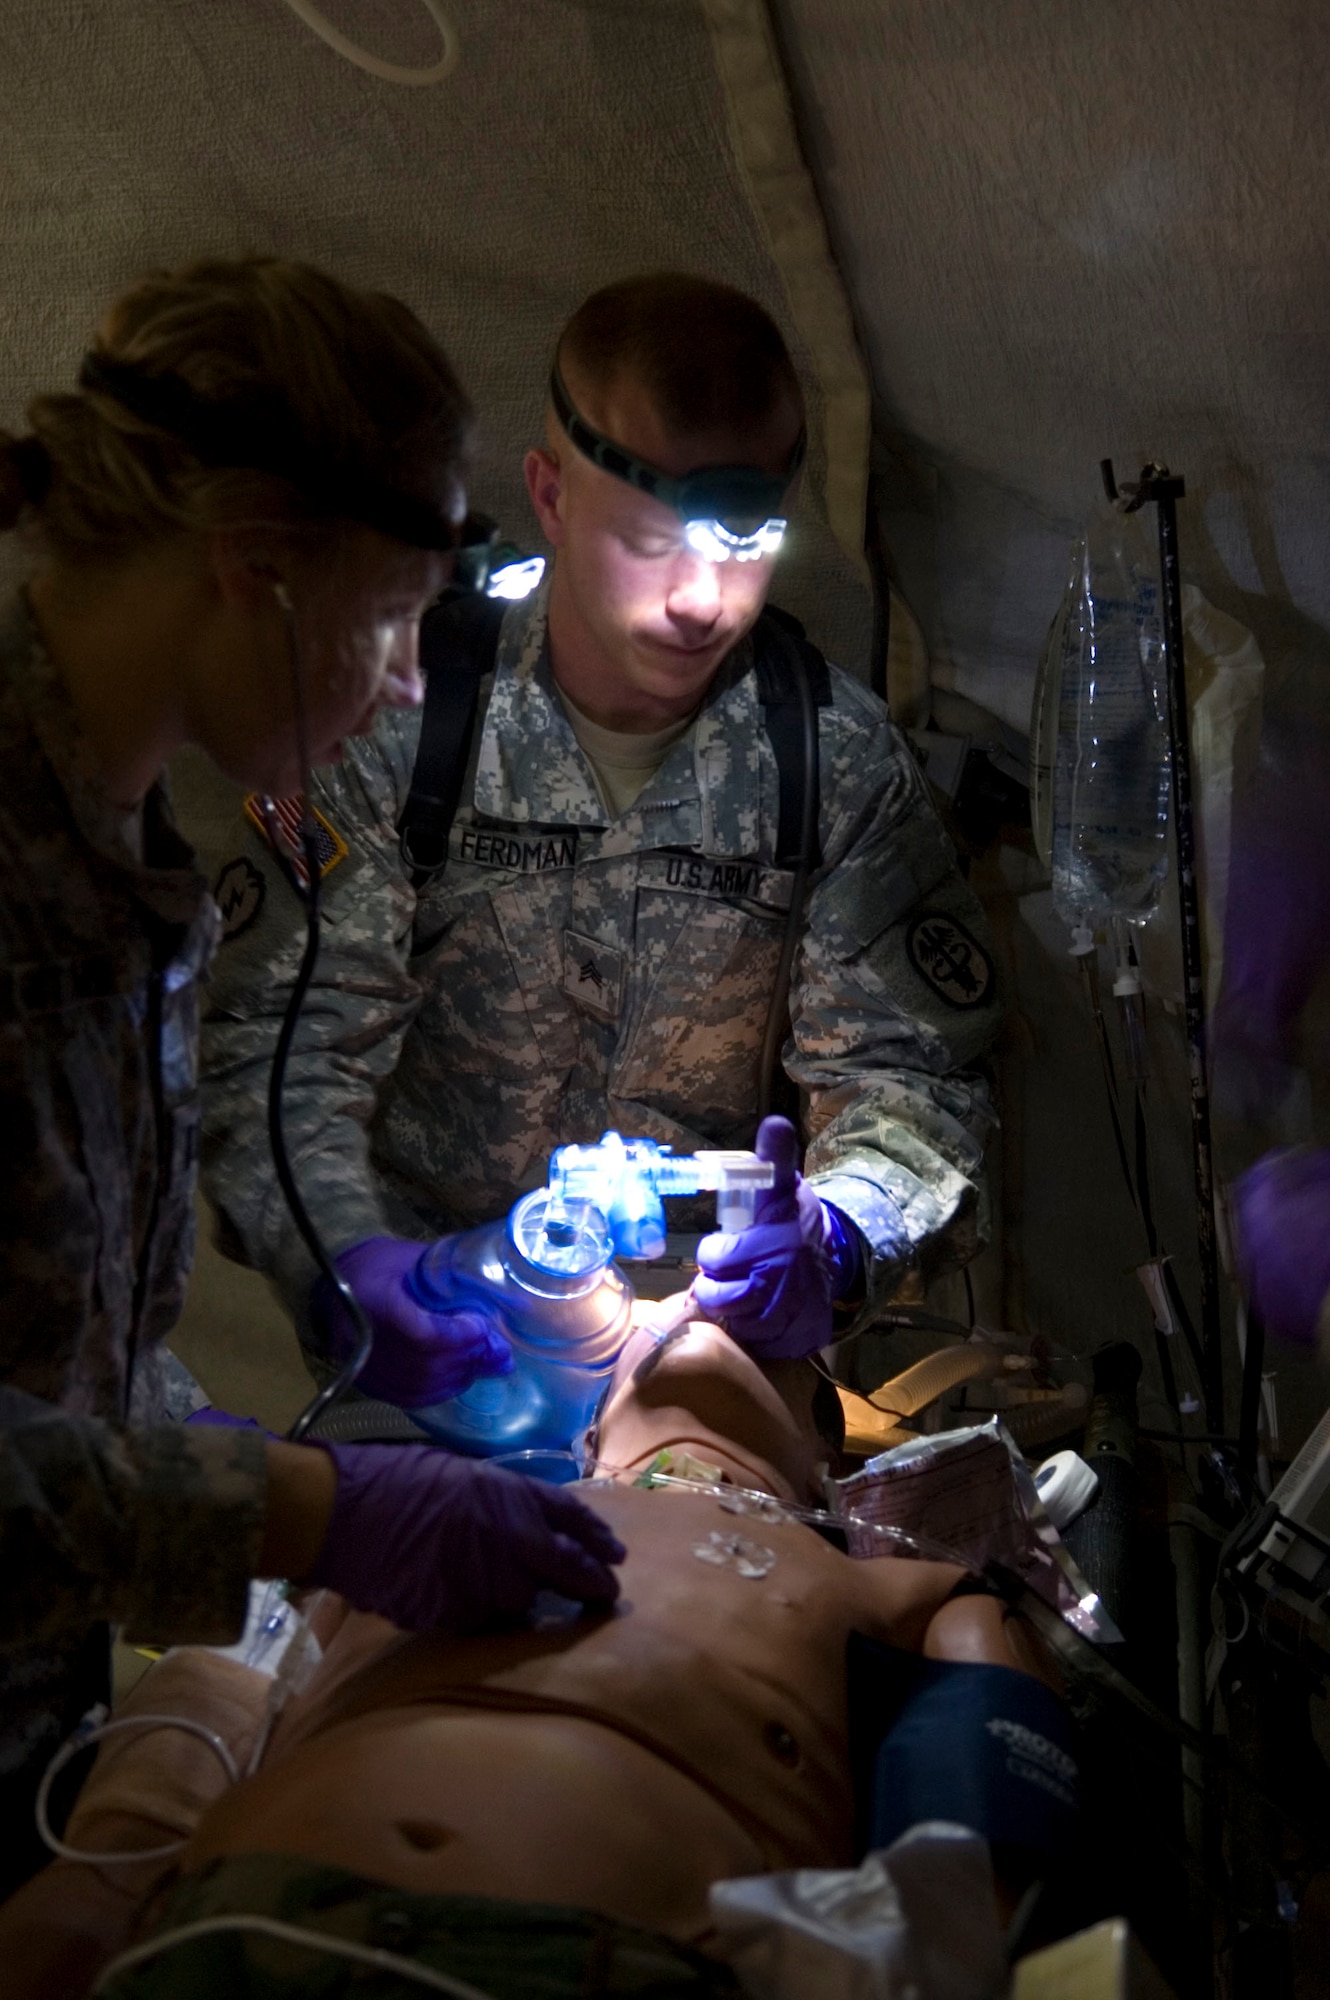 Sergeant Ryan Ferdman (U.S. Army) a respiratory therapist with the Pacific Air Forces Critical Care Air Transport Team, Tripler Army Medical Center, Honolulu, Hawaii helps a simulated patient breathe during Critical Care Air Transport Team training conducted by the United States Air Force School of Aerospace Medicine at Brooks City-Base, Texas. The week-long course prepares CCATT members for medical evacuation operations and duties. (U.S. Air Force photo/Steve Thurow) 